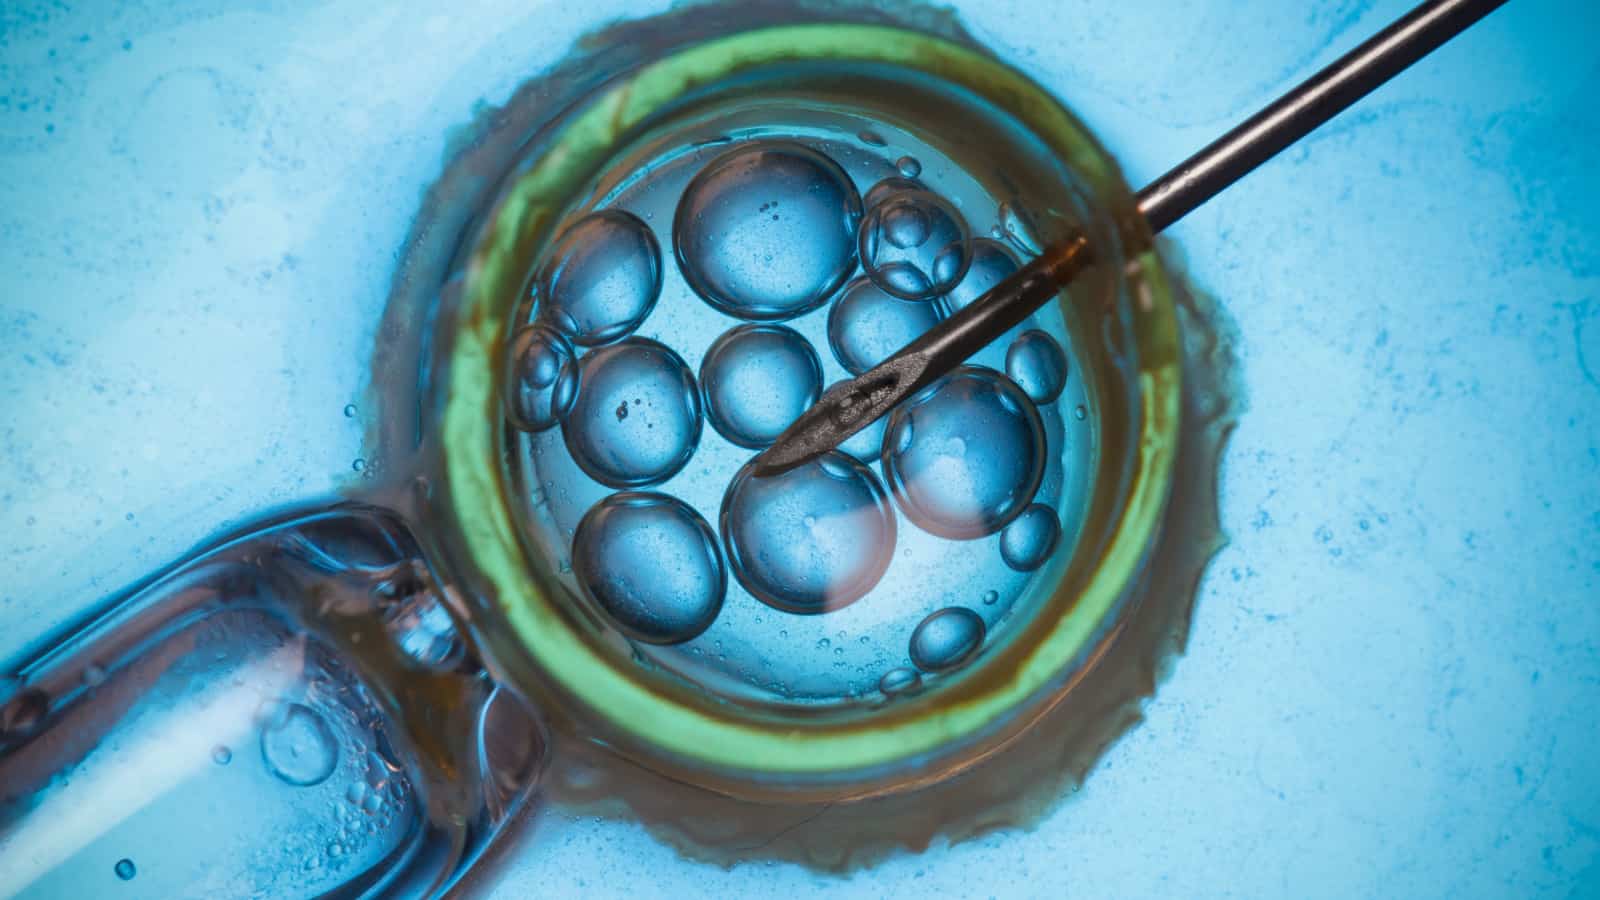 Senate bill to protect IVF blocked by Republican objection